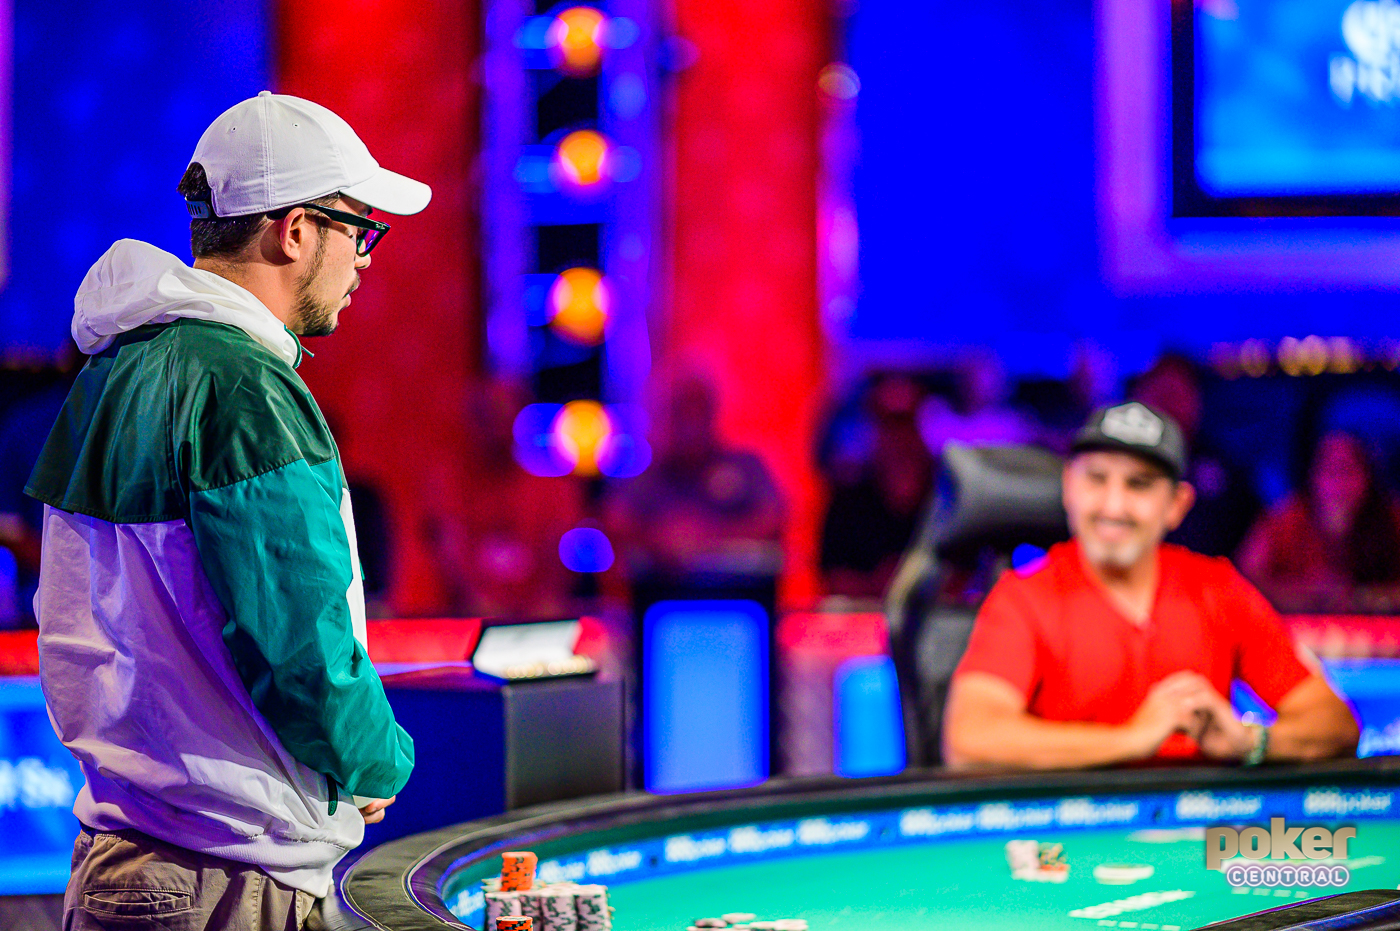 The adrenaline reaches new heights for Phil Hui as Josh Arieh's all-in for his tournament life.